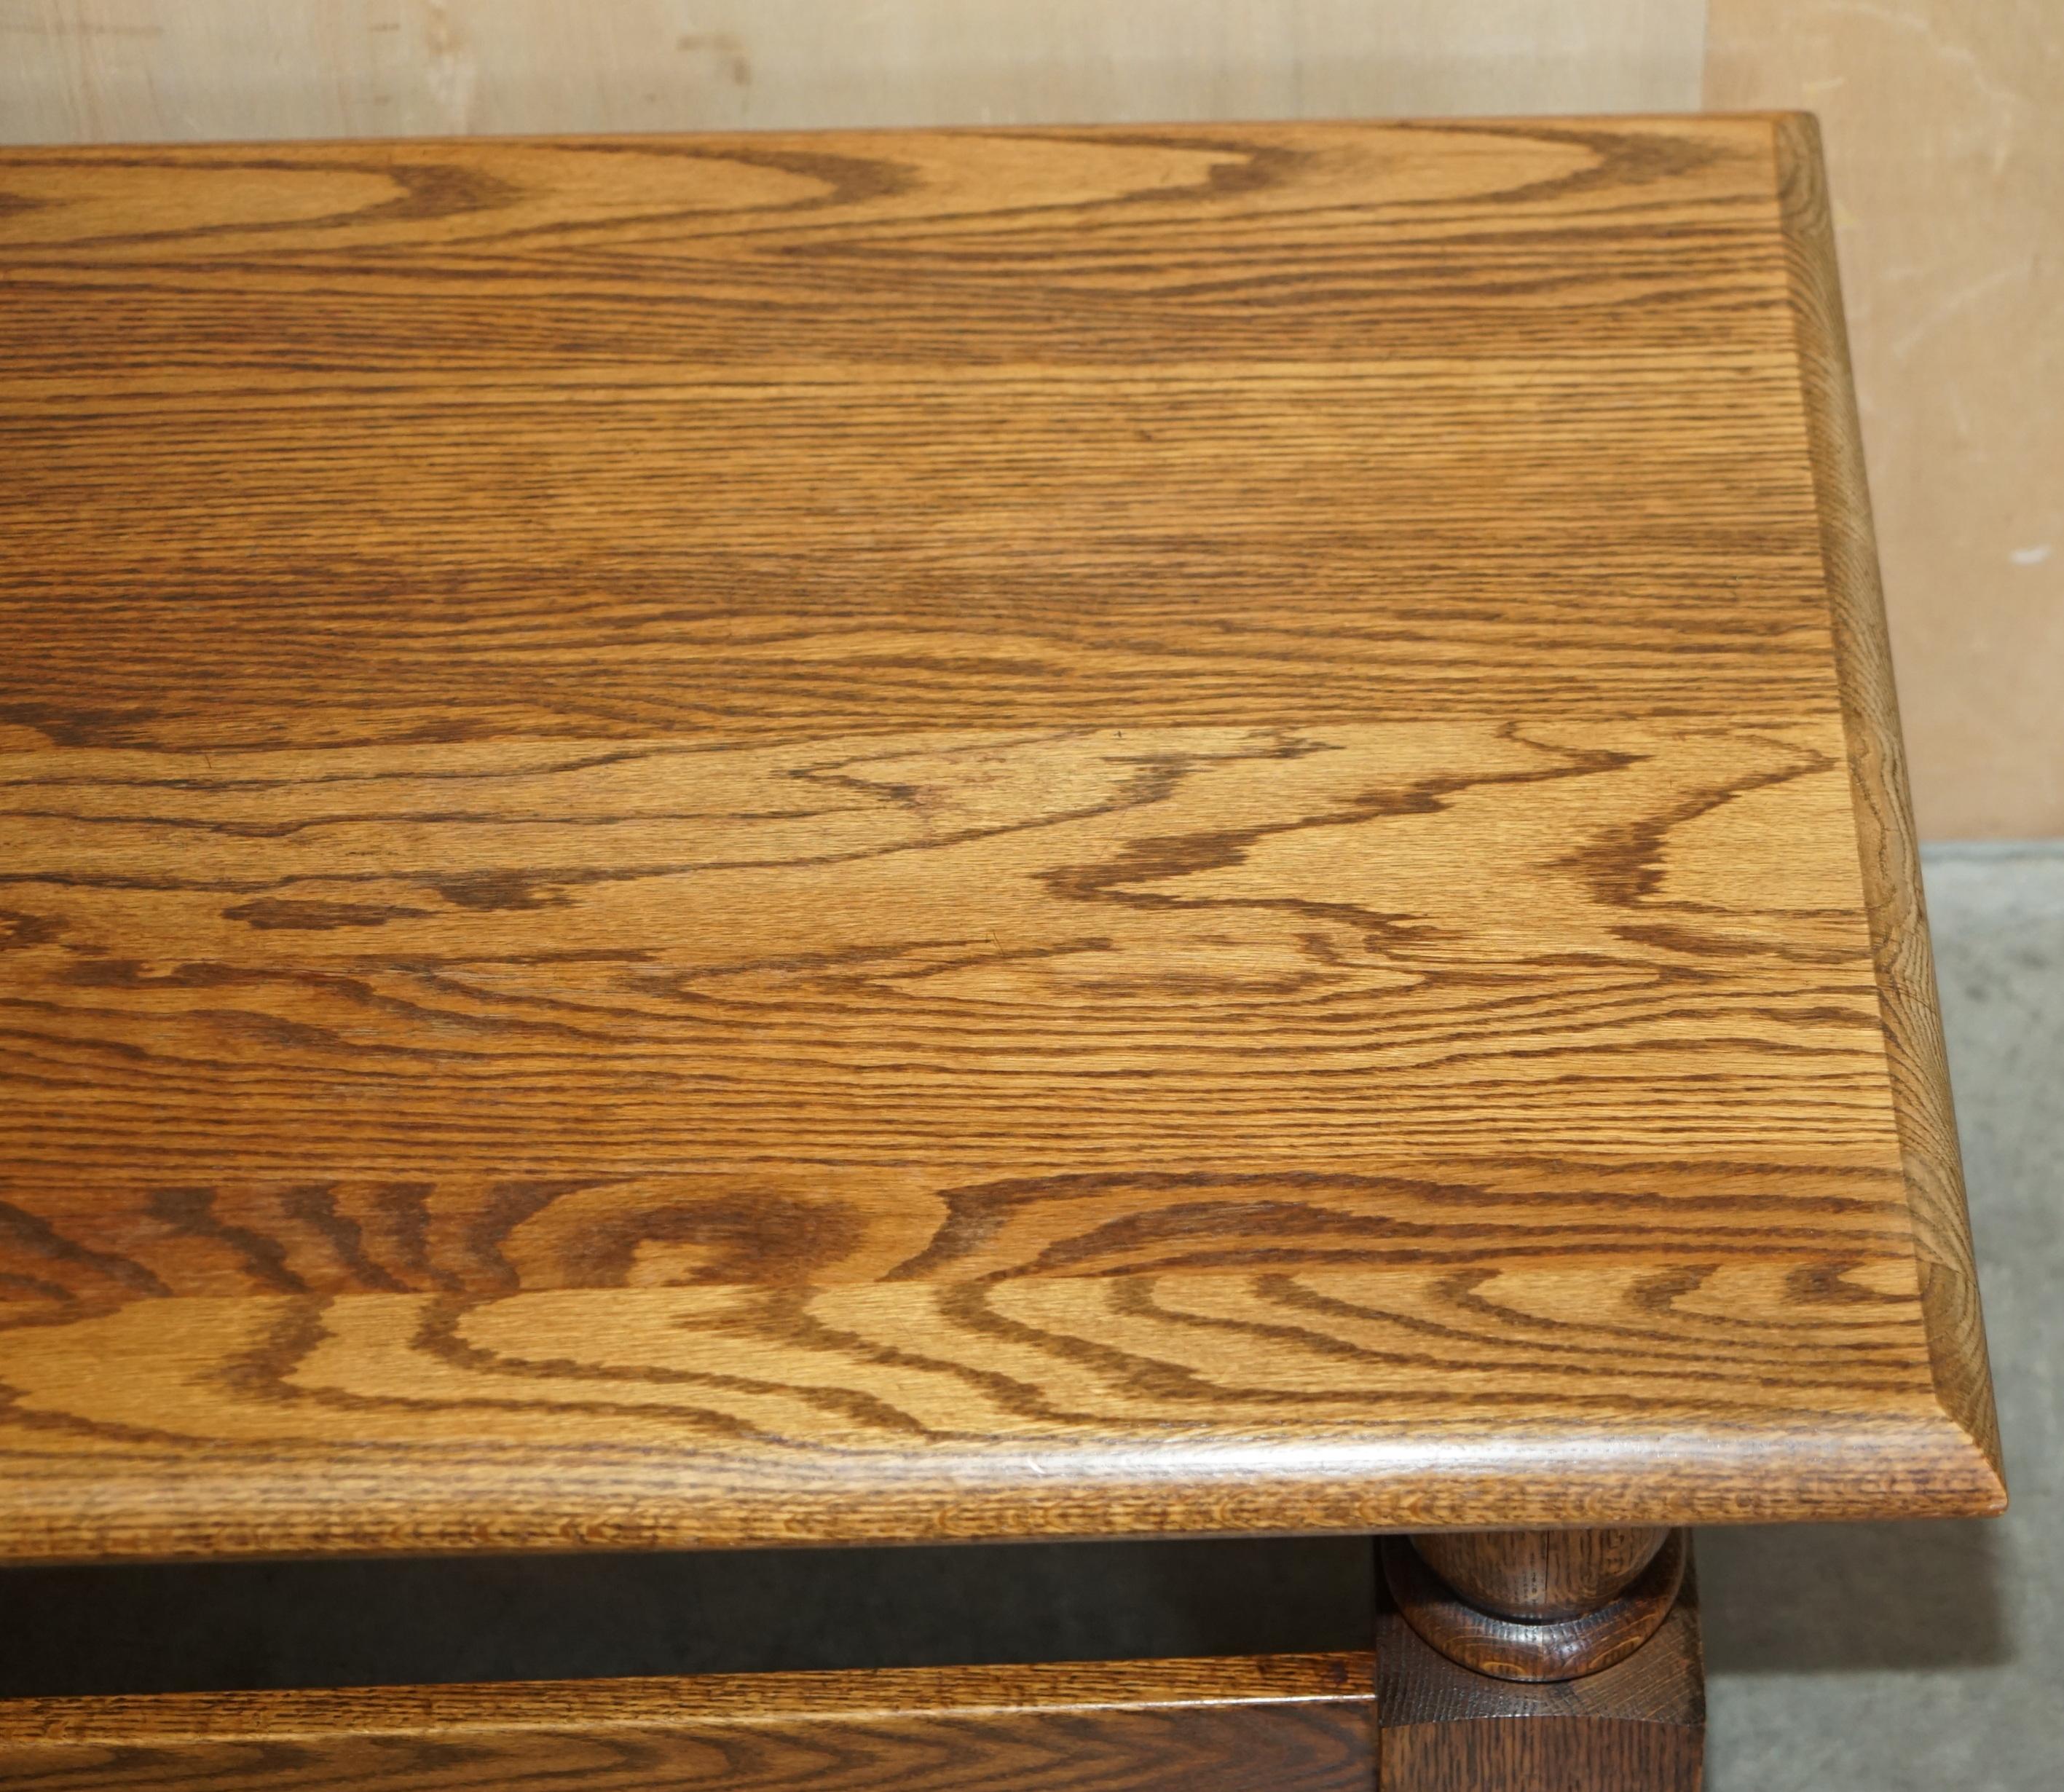 Vintage English Oak Coffee Table Made in the Style of Edwardian Refectory Tables For Sale 6